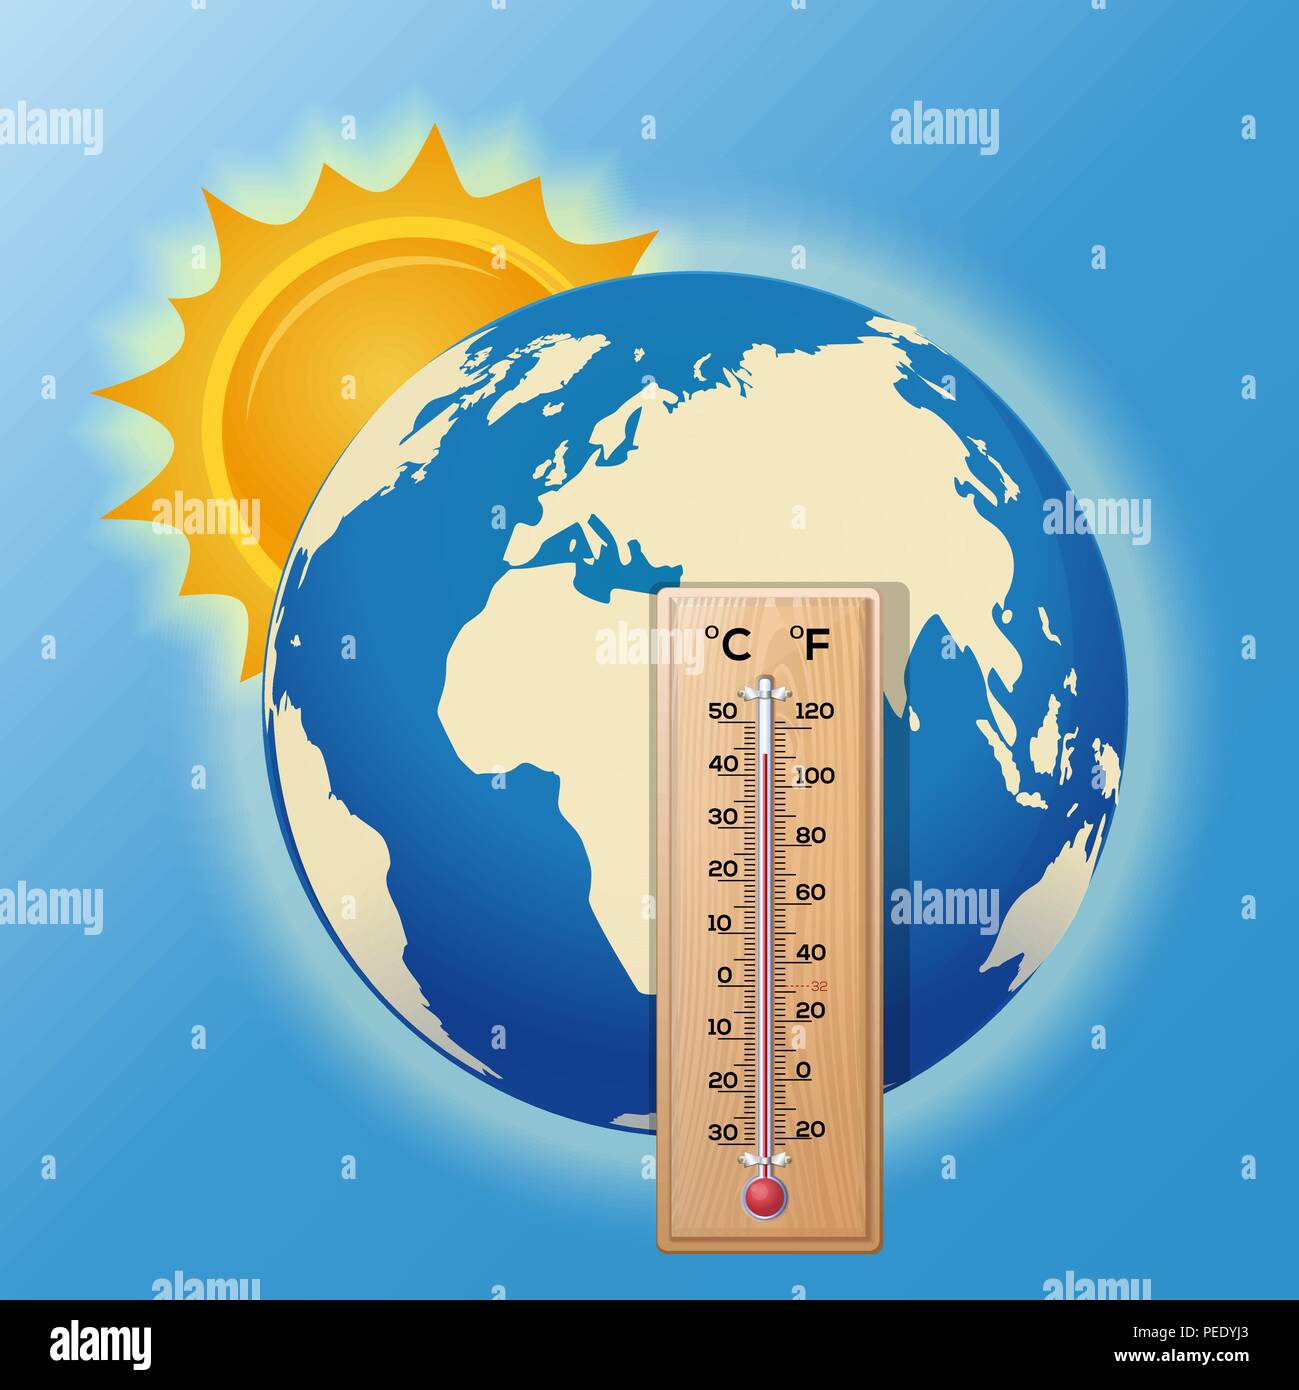 https://c8.alamy.com/comp/PEDYJ3/thermometer-on-the-background-of-the-globe-the-sun-illuminates-the-earth-high-temperature-on-the-thermometer-global-warming-vector-illustration-PEDYJ3.jpg